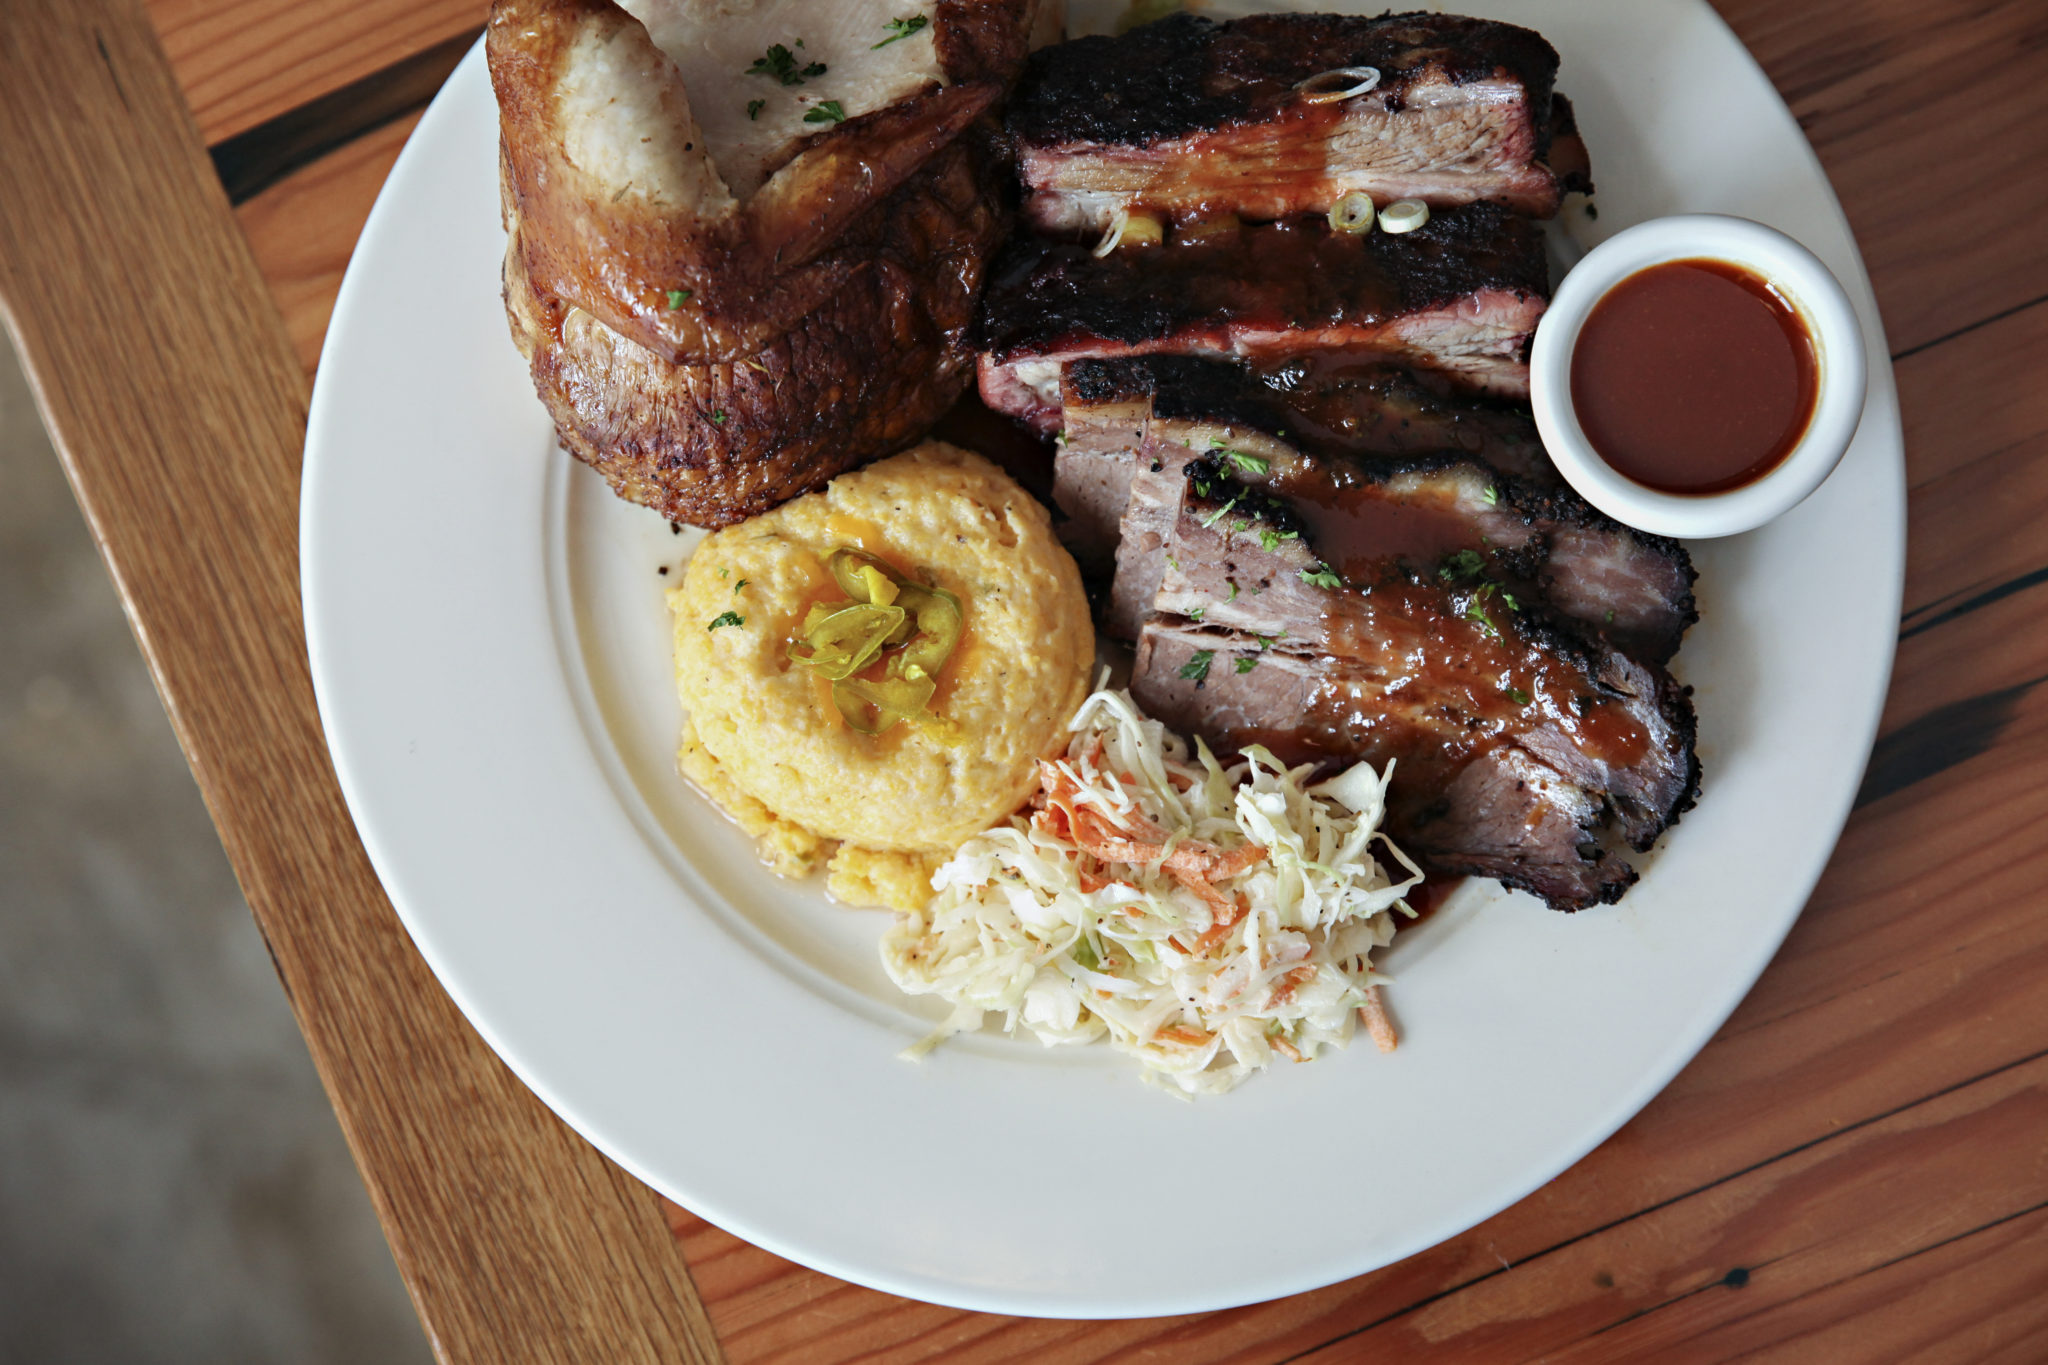 Barbeque ribs, chicken and coleslaw on a plate